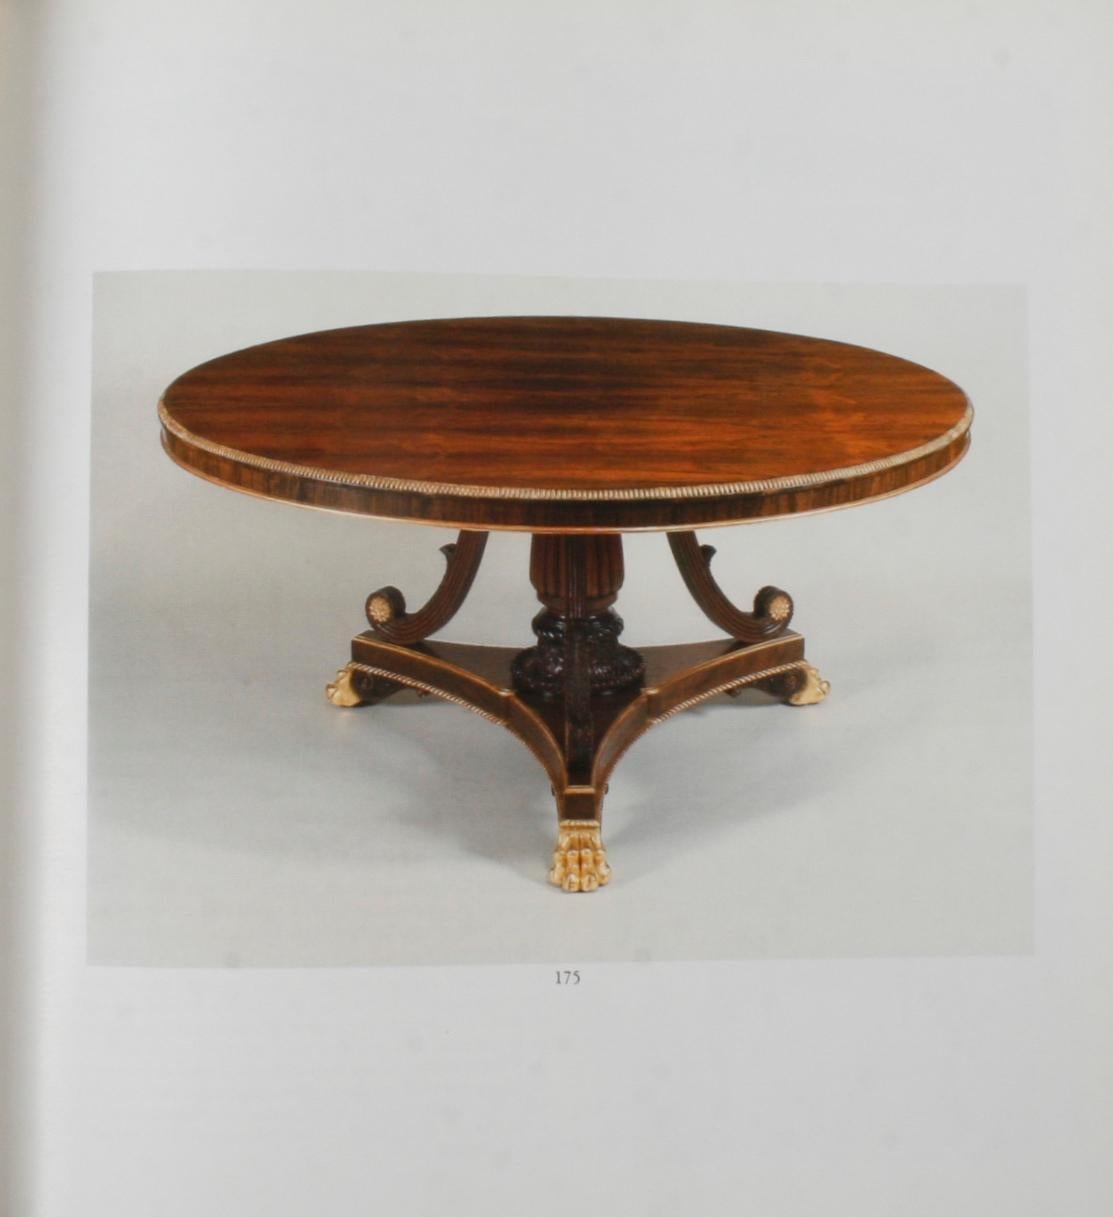 Sotheby's Auction Catalogue for The Mrs. Charles Wrightsman Palm Beach Estate 7